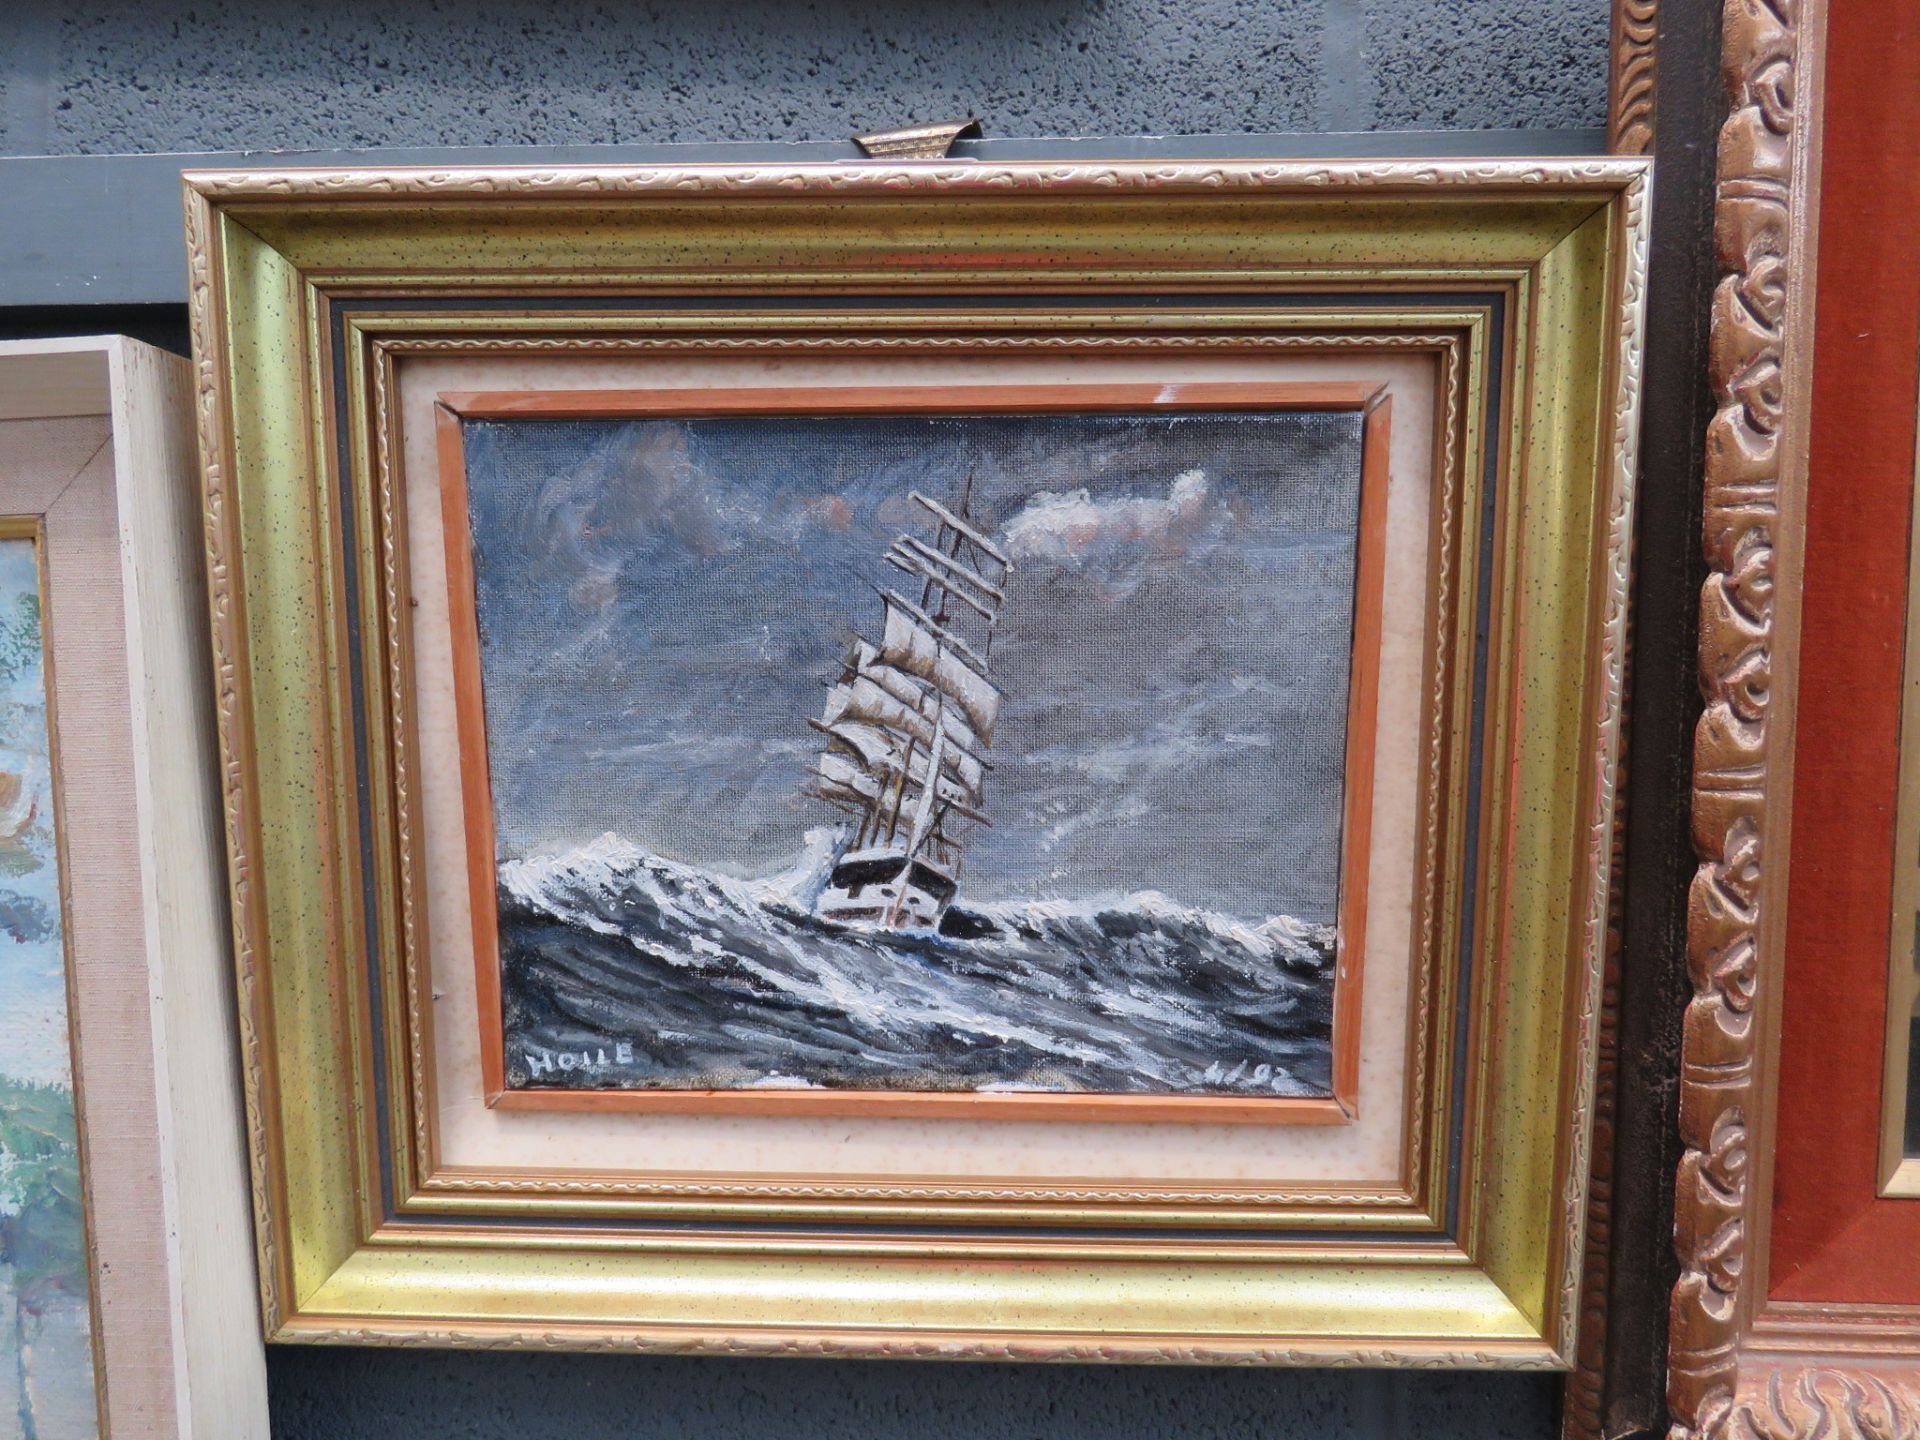 Oil on board of a sailing ship signed 'Holle'